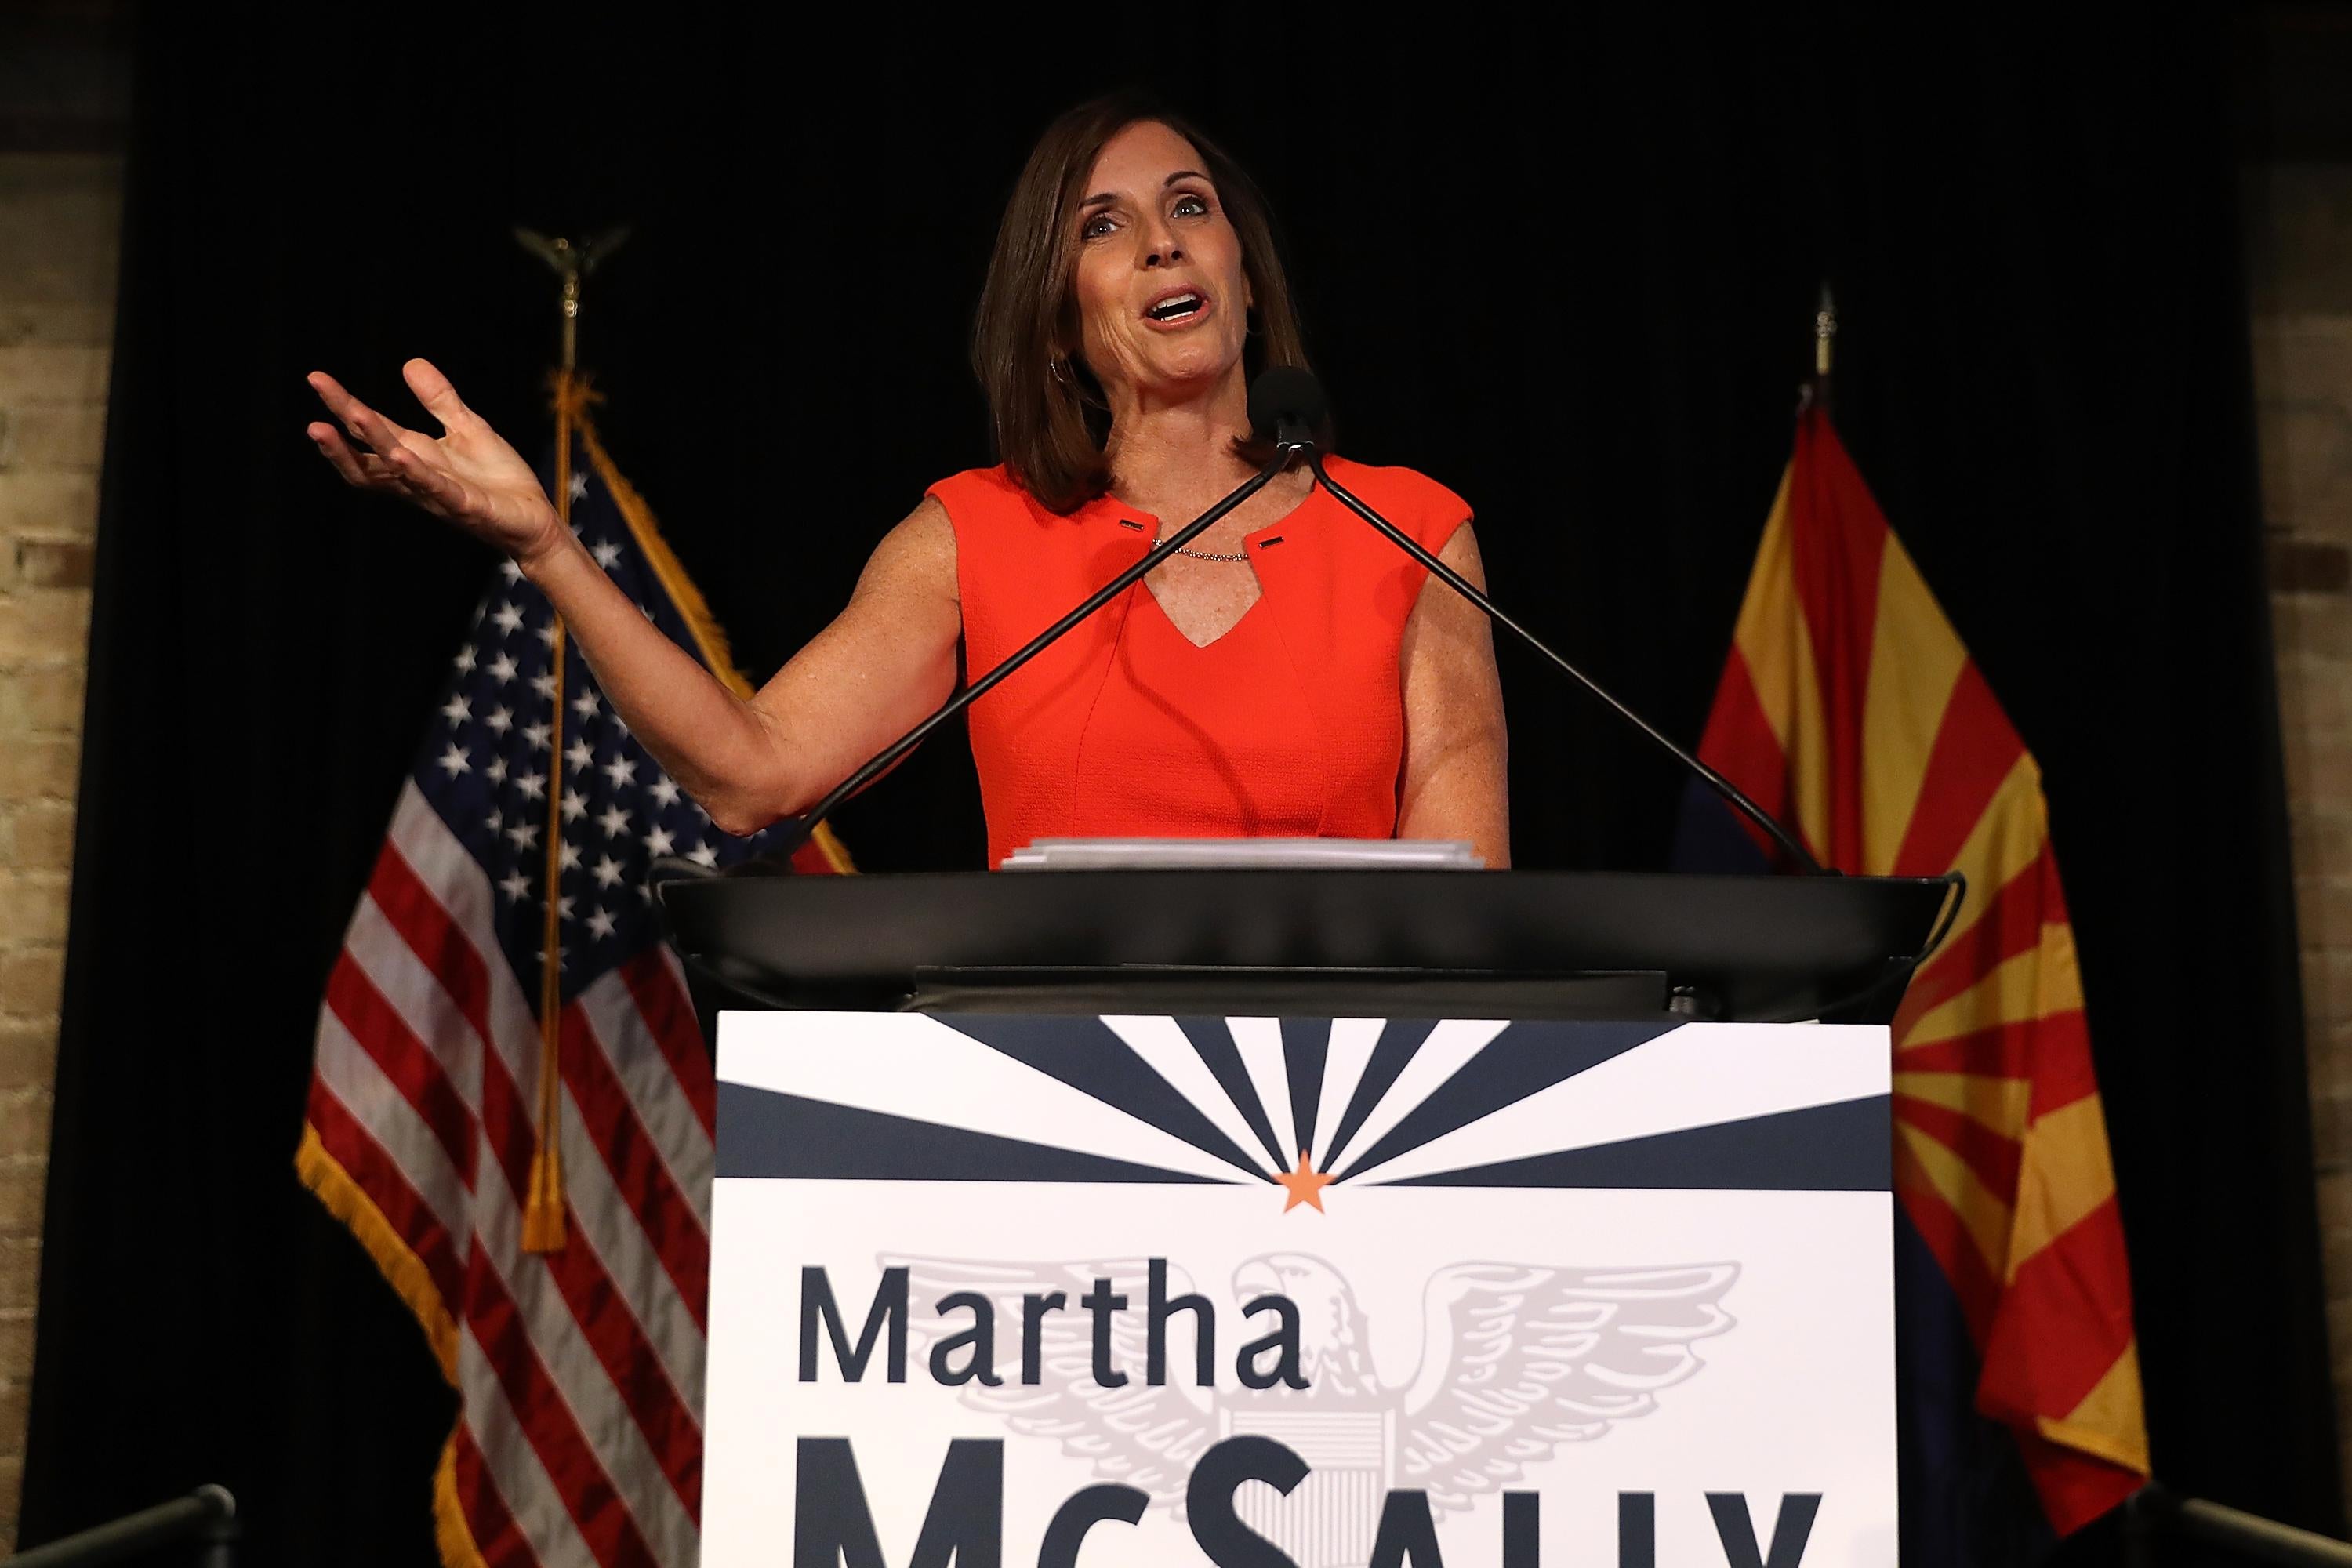 Martha McSally, in a red dress, gestures upward while speaking at a podium.